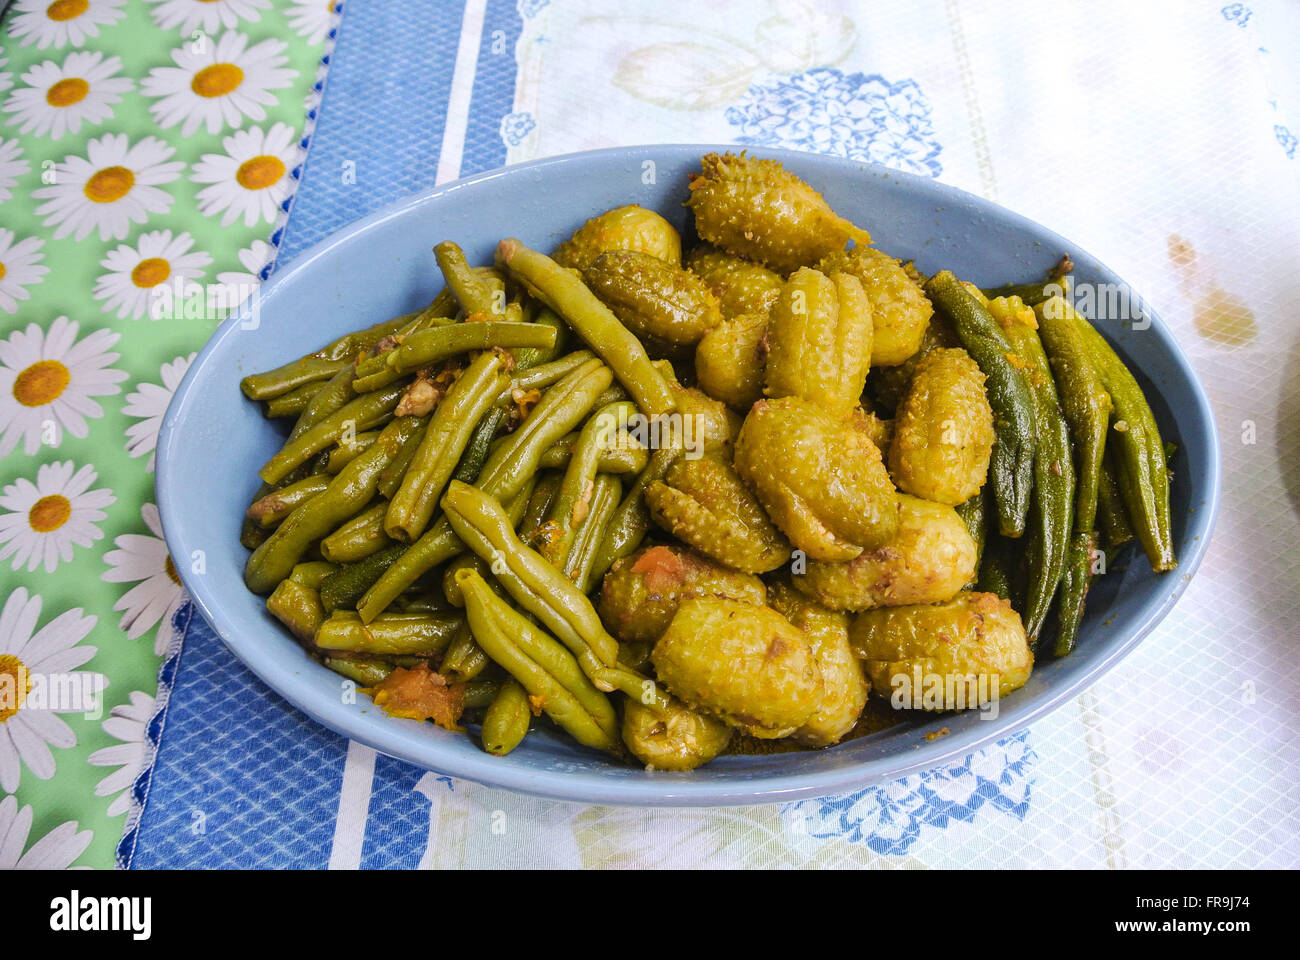 Plate with baked pumpkin and green beans Stock Photo